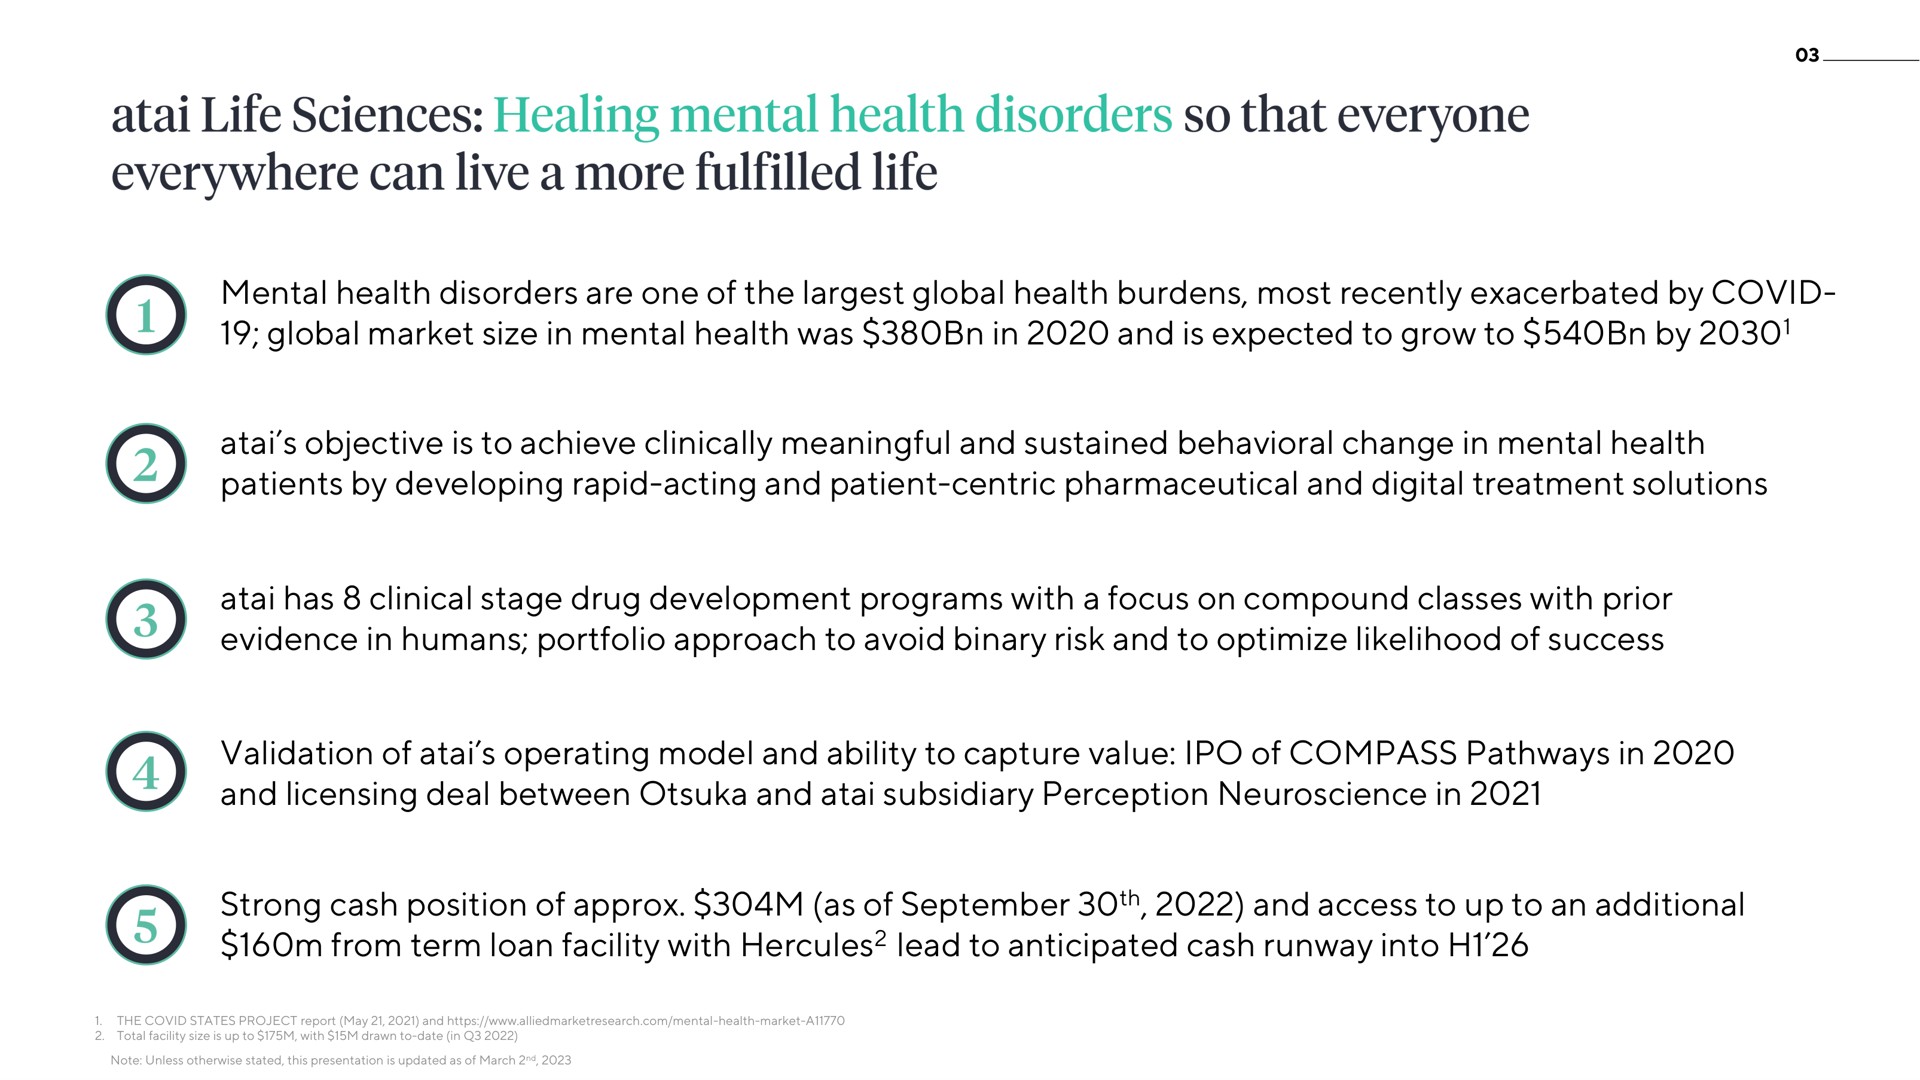 mental health disorders are one of the global health burdens most recently exacerbated by covid global market size in mental health was in and is expected to grow to by objective is to achieve clinically meaningful and sustained behavioral change in mental health patients by developing rapid acting and patient centric pharmaceutical and digital treatment solutions has clinical stage drug development programs with a focus on compound classes with prior evidence in humans portfolio approach to avoid binary risk and to optimize likelihood of success validation of operating model and ability to capture value of compass pathways in and licensing deal between and subsidiary perception in strong cash position of as of and access to up to an additional from term loan facility with lead to anticipated cash runway into life sciences healing everywhere can live more life so that everyone | ATAI